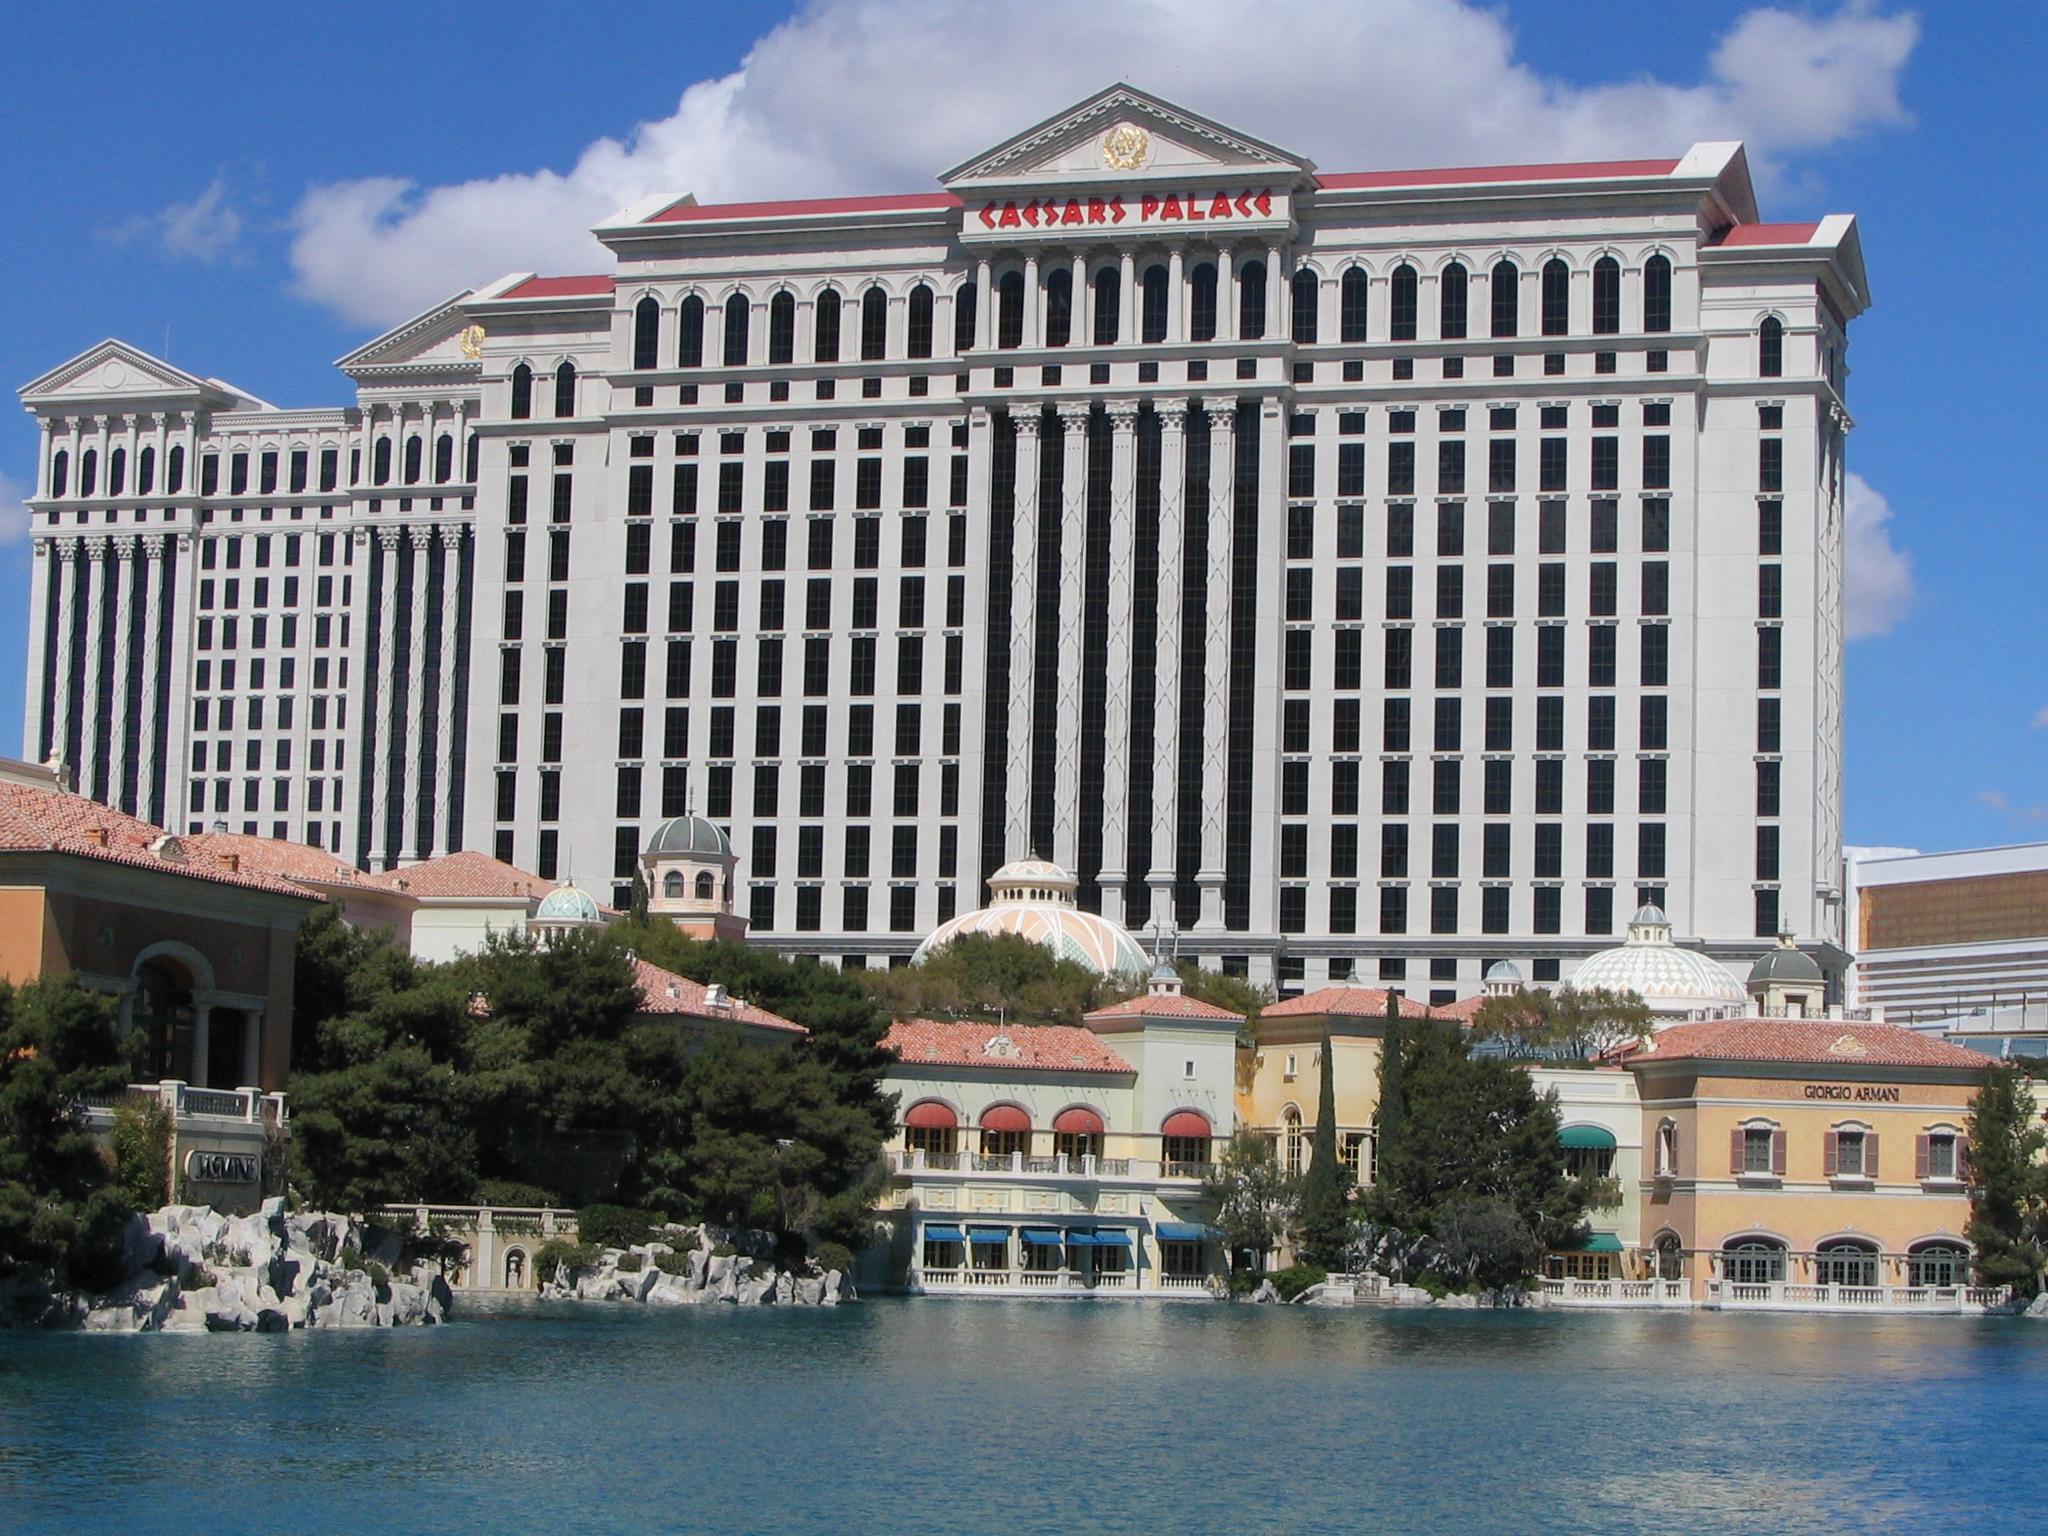 Book Caesars Palace hotel with the latest Las Vegas discount